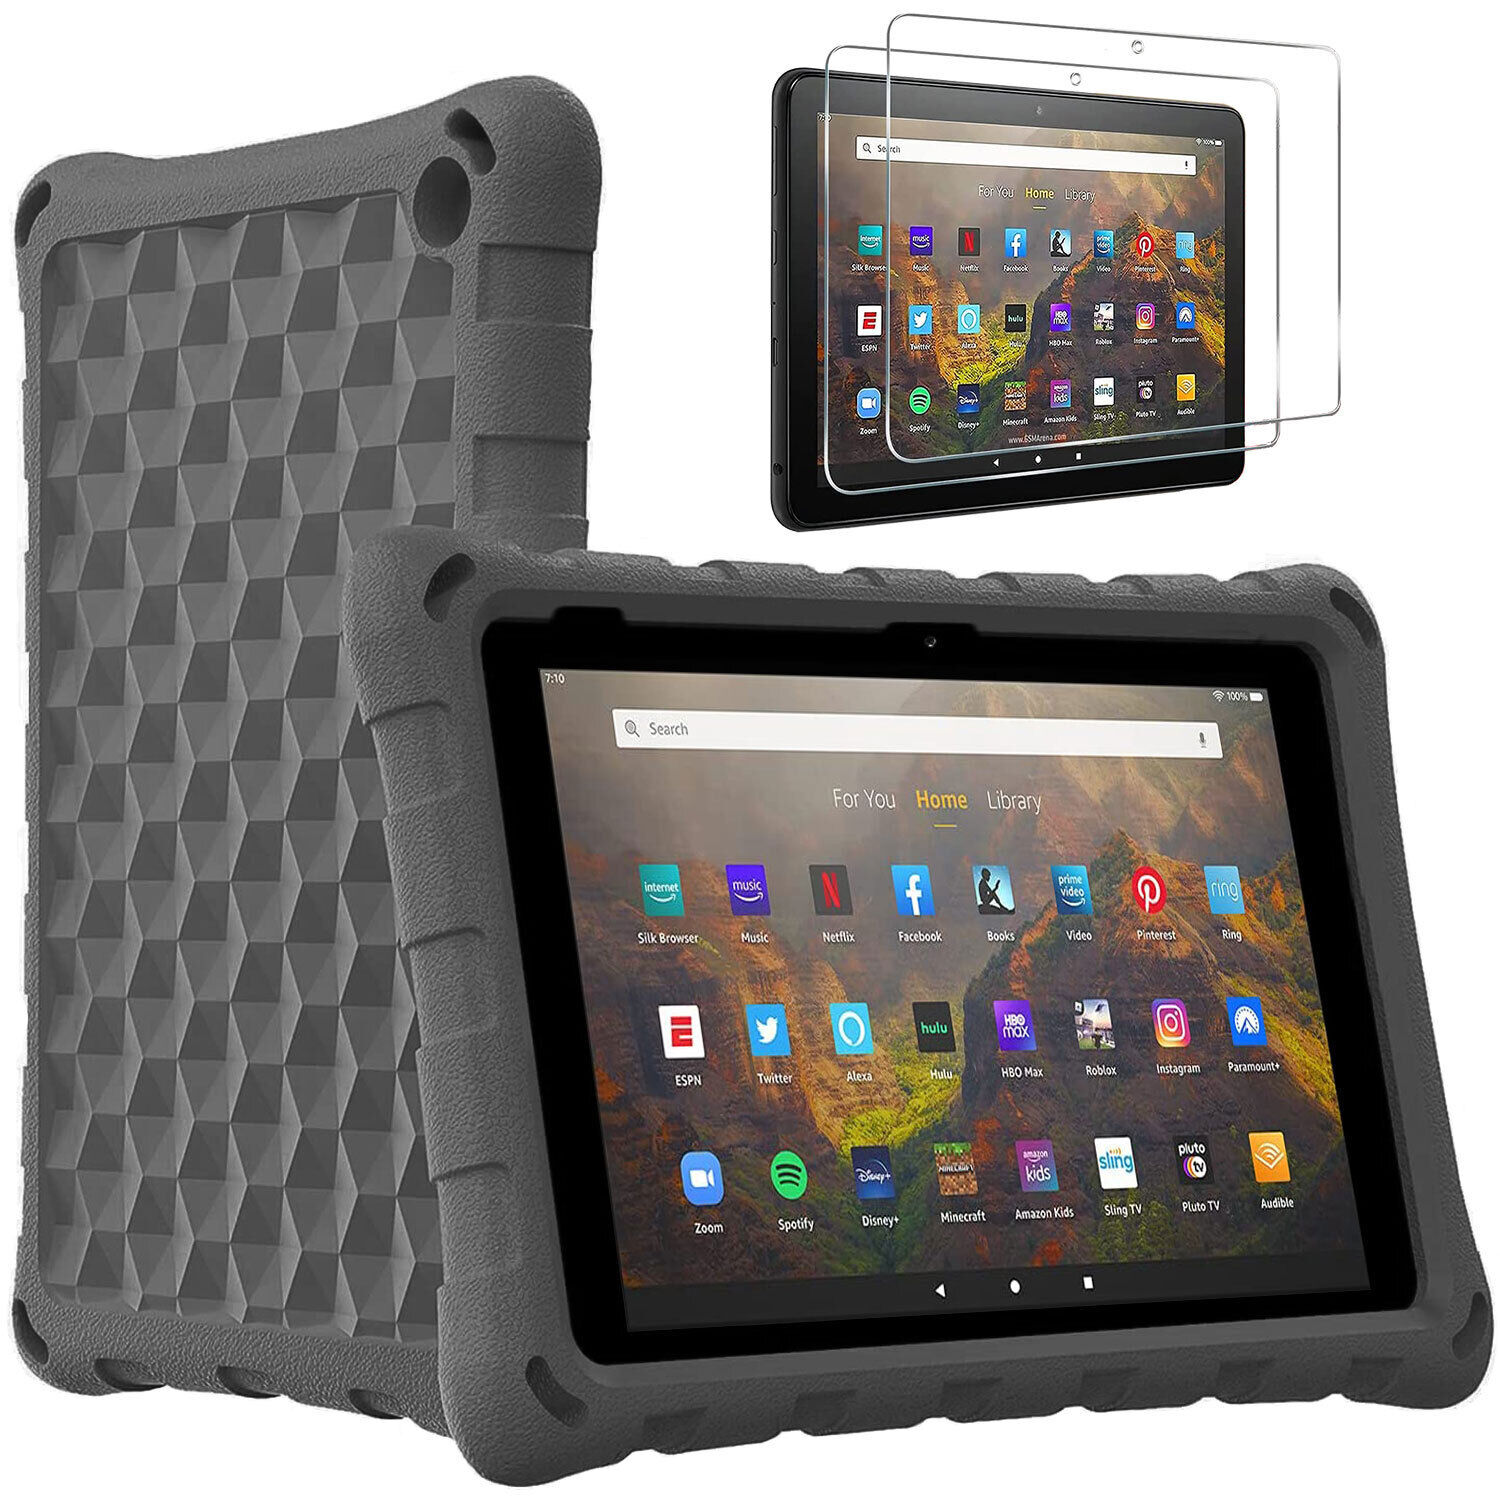 Amazon Fire 7 Tablet Case 12th Gen/ 2PCS Glass Screen Protector for Fire 7\